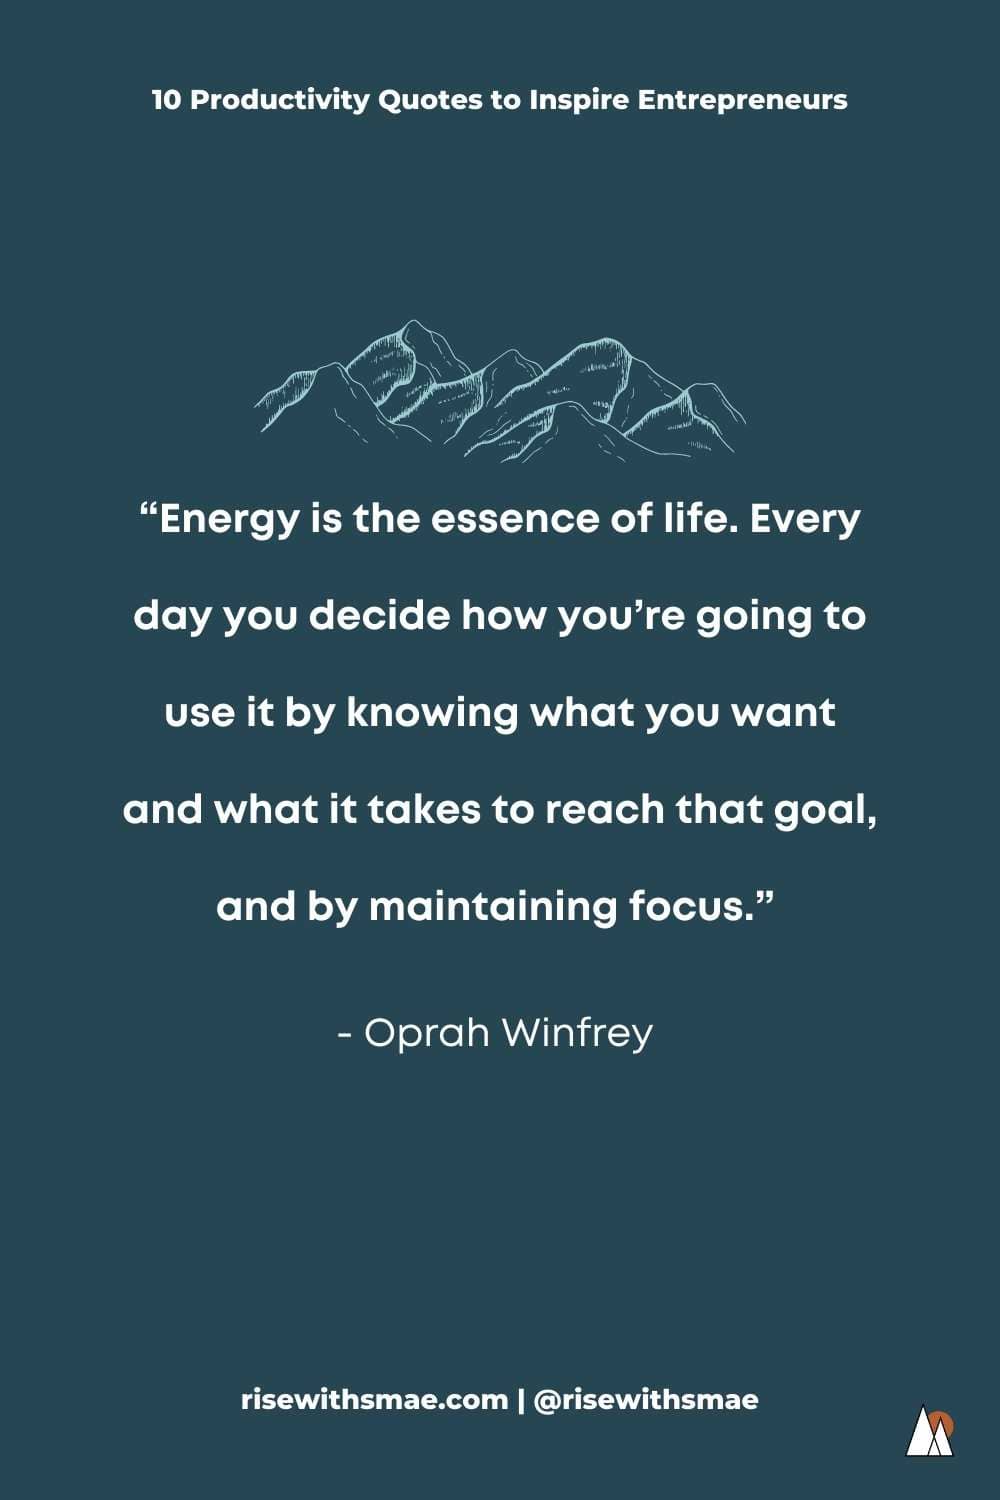 PRODUCTIVITY QUOTES FOR ENTREPRENEURS - Oprah | Pin Image!